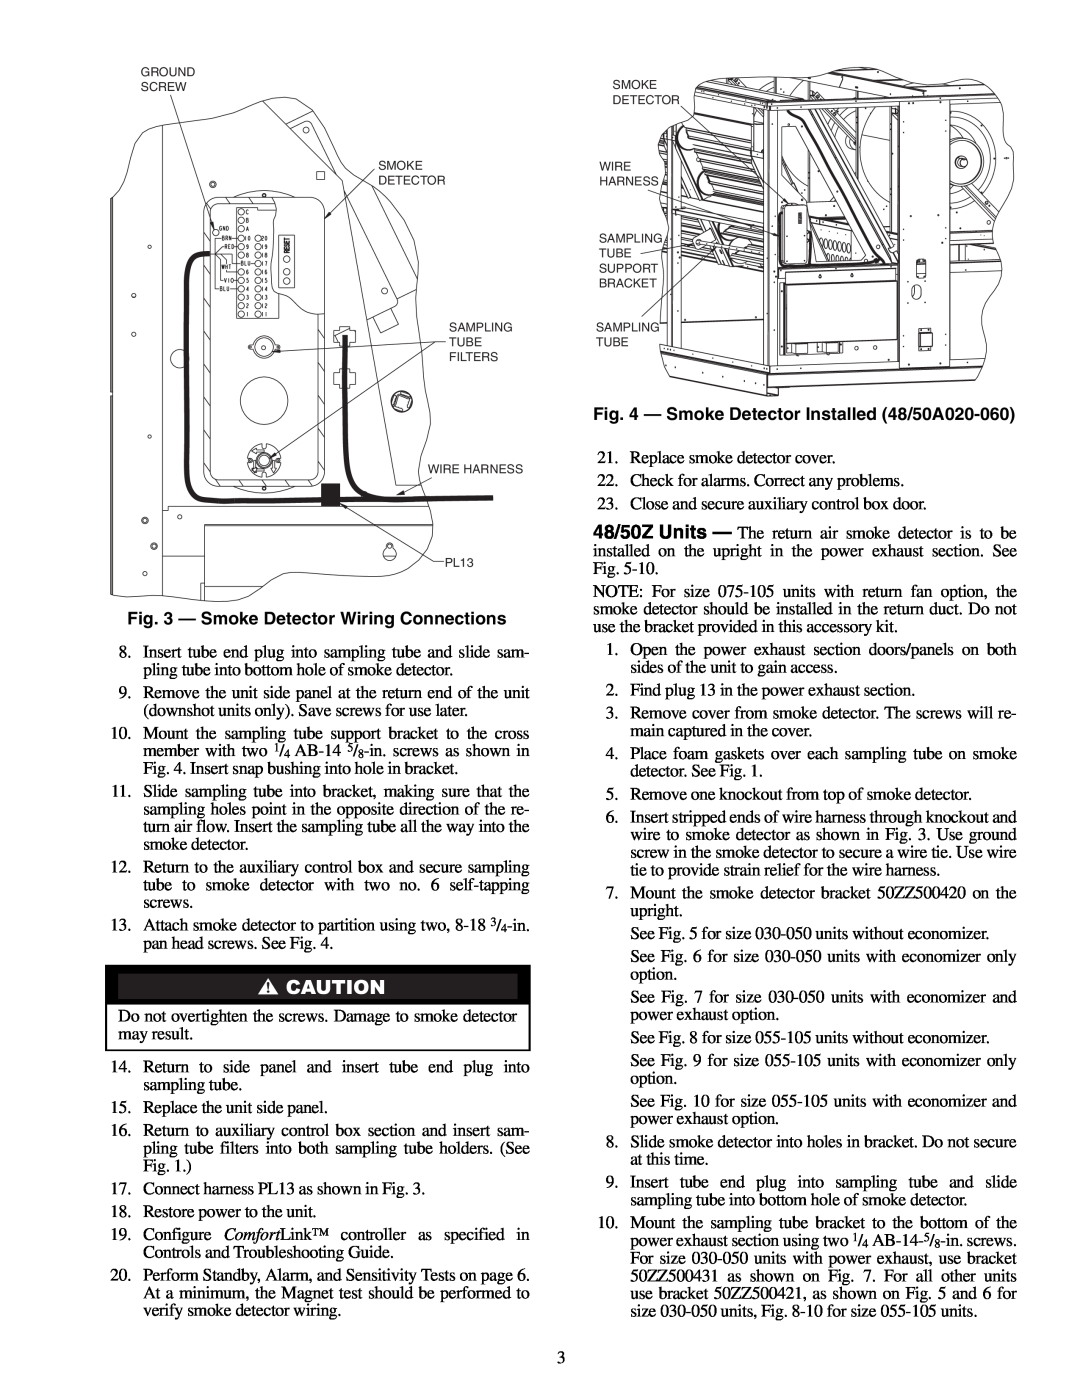 Carrier installation instructions Smoke Detector Wiring Connections, Smoke Detector Installed 48/50A020-060, Tube 